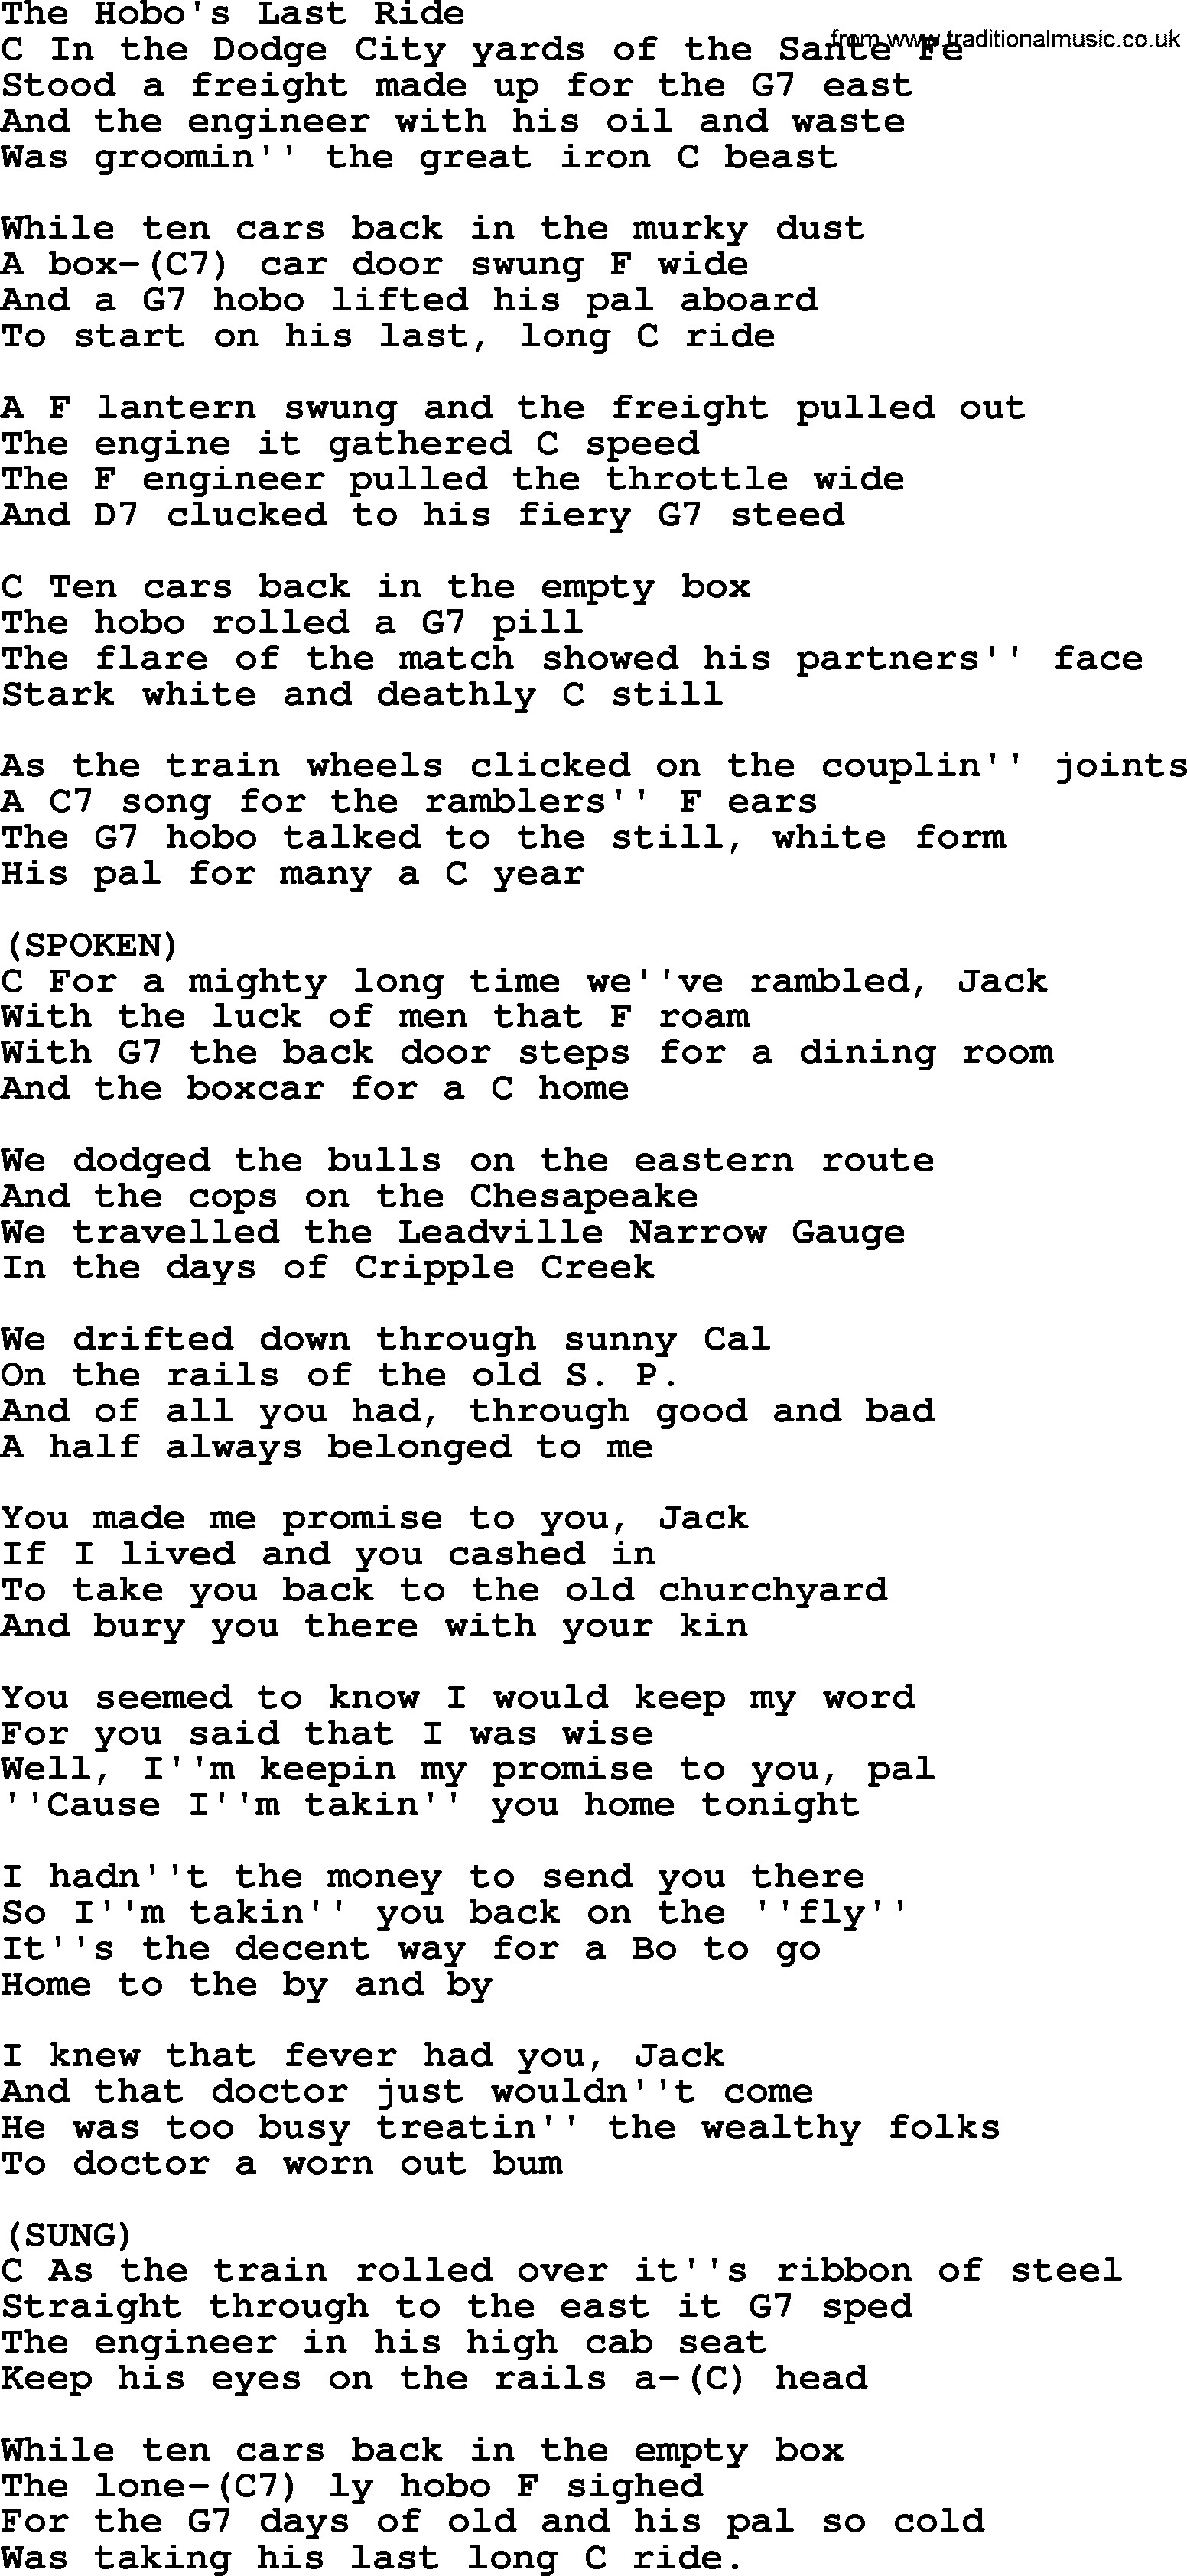 Bluegrass song: The Hobo's Last Ride, lyrics and chords